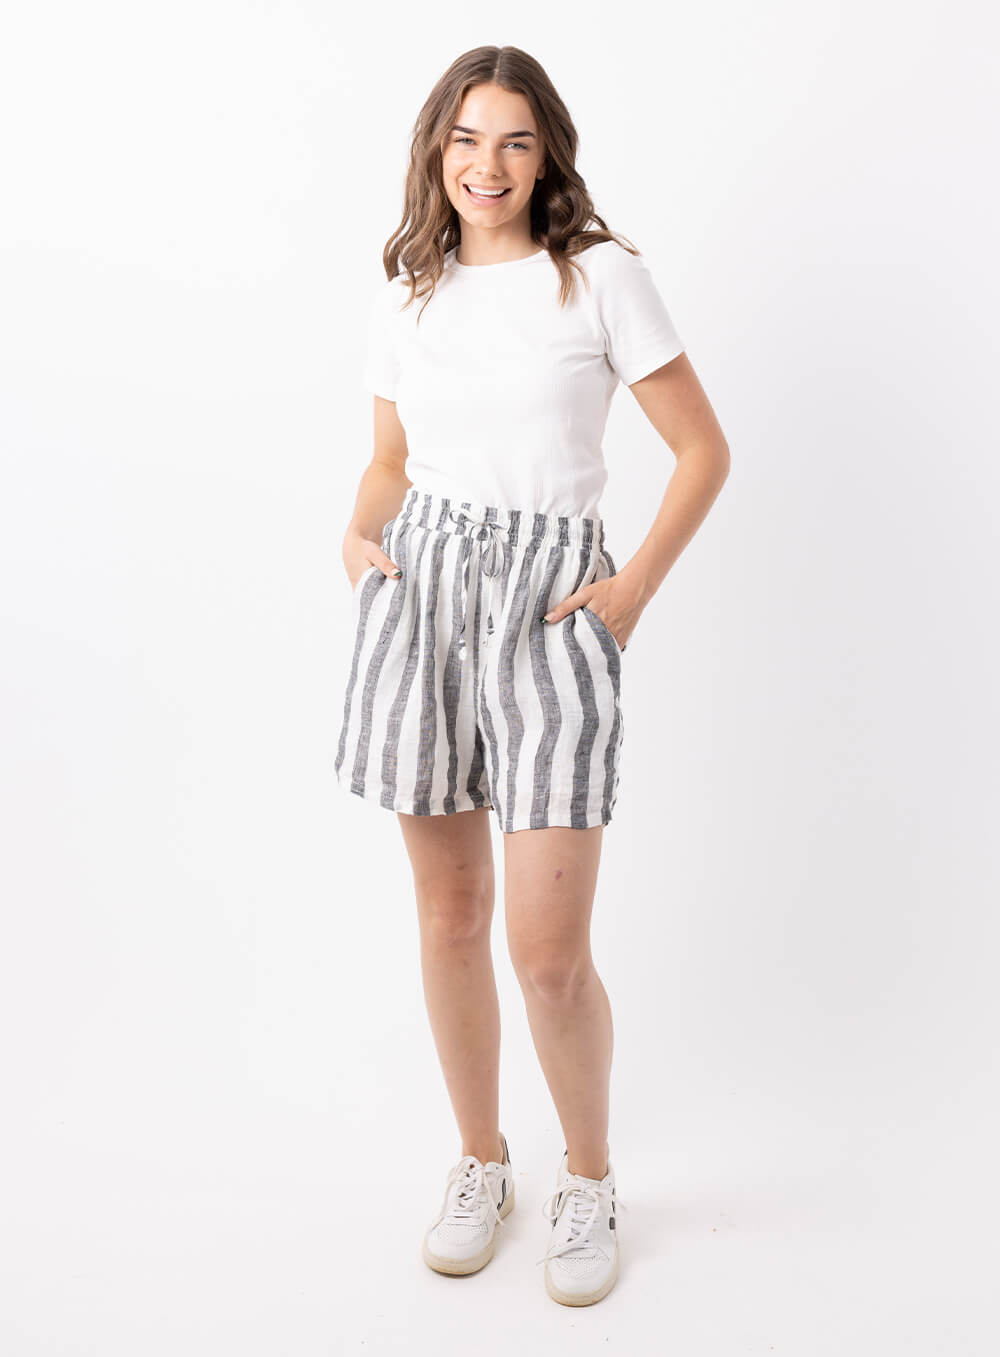 The Charlie stripe linen short in black and white is made from 100% breathable linen, featuring wide elastic waistband with tie, finishes mid thigh with finished hem